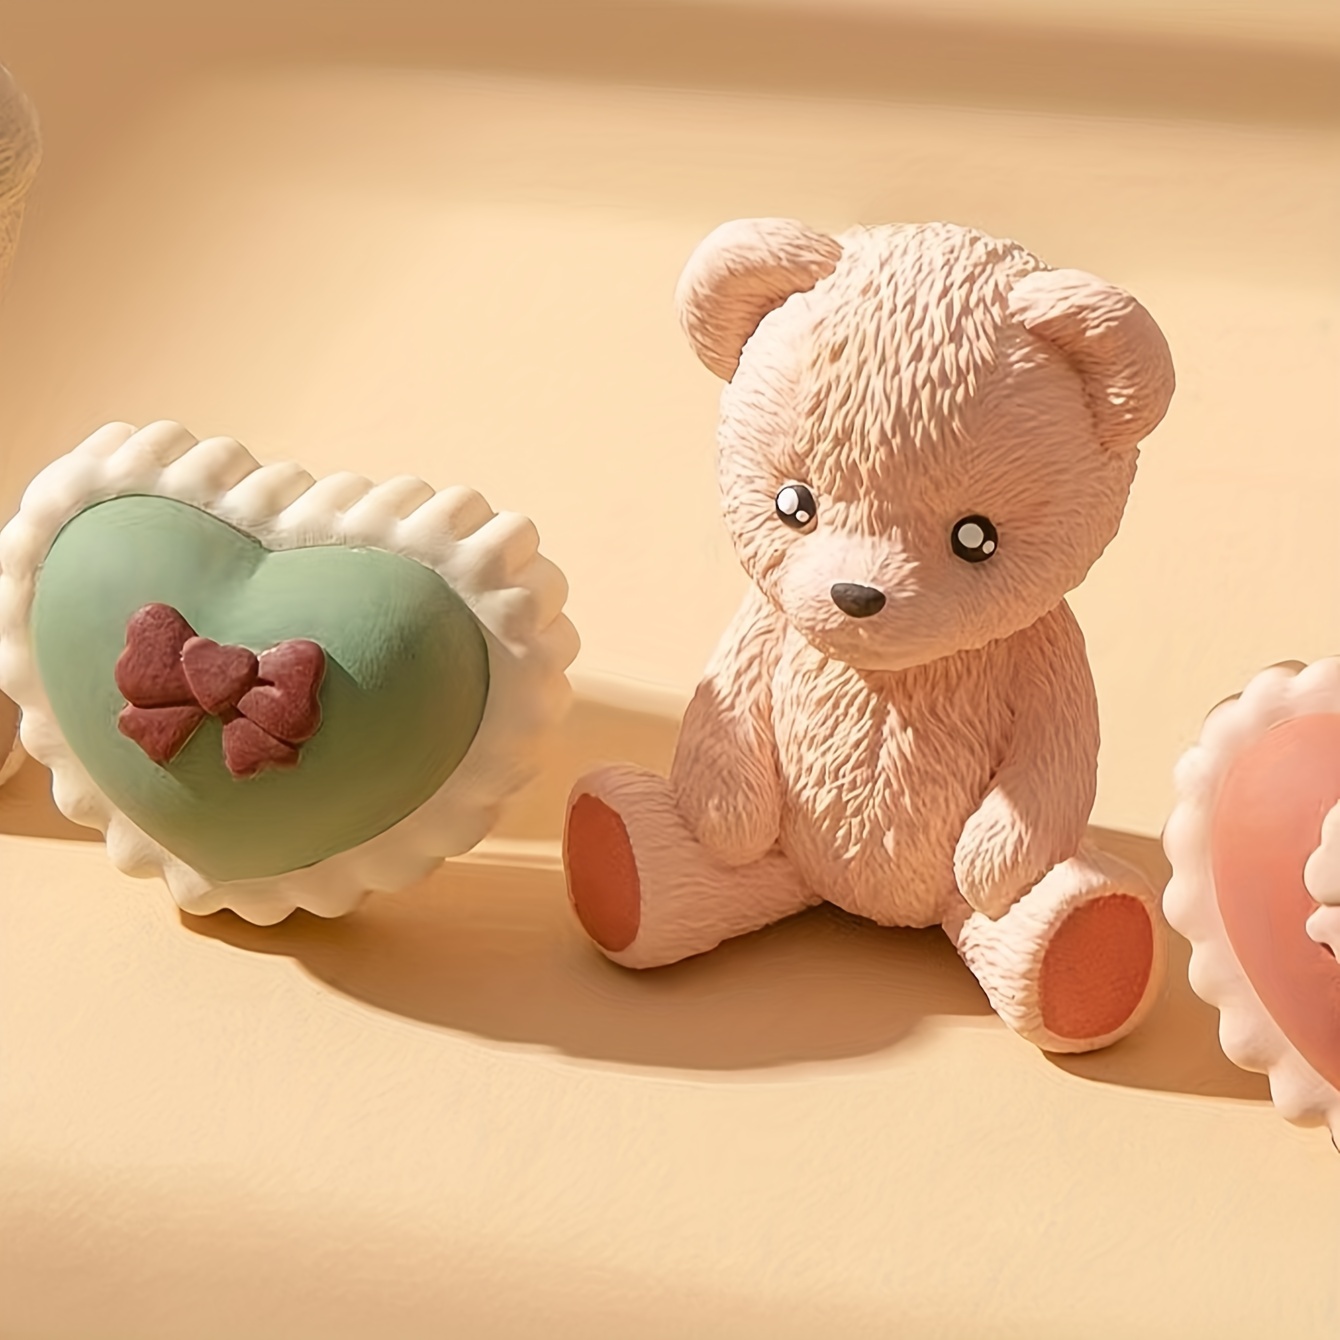 Yedadone 3D Teddy Bear Doll Silicone Fondant Mold Large Bear Chocolate Candy Gum Paste Silicone Mold Clay Soap Candle Mold for Cake Decorating Sugar Craft